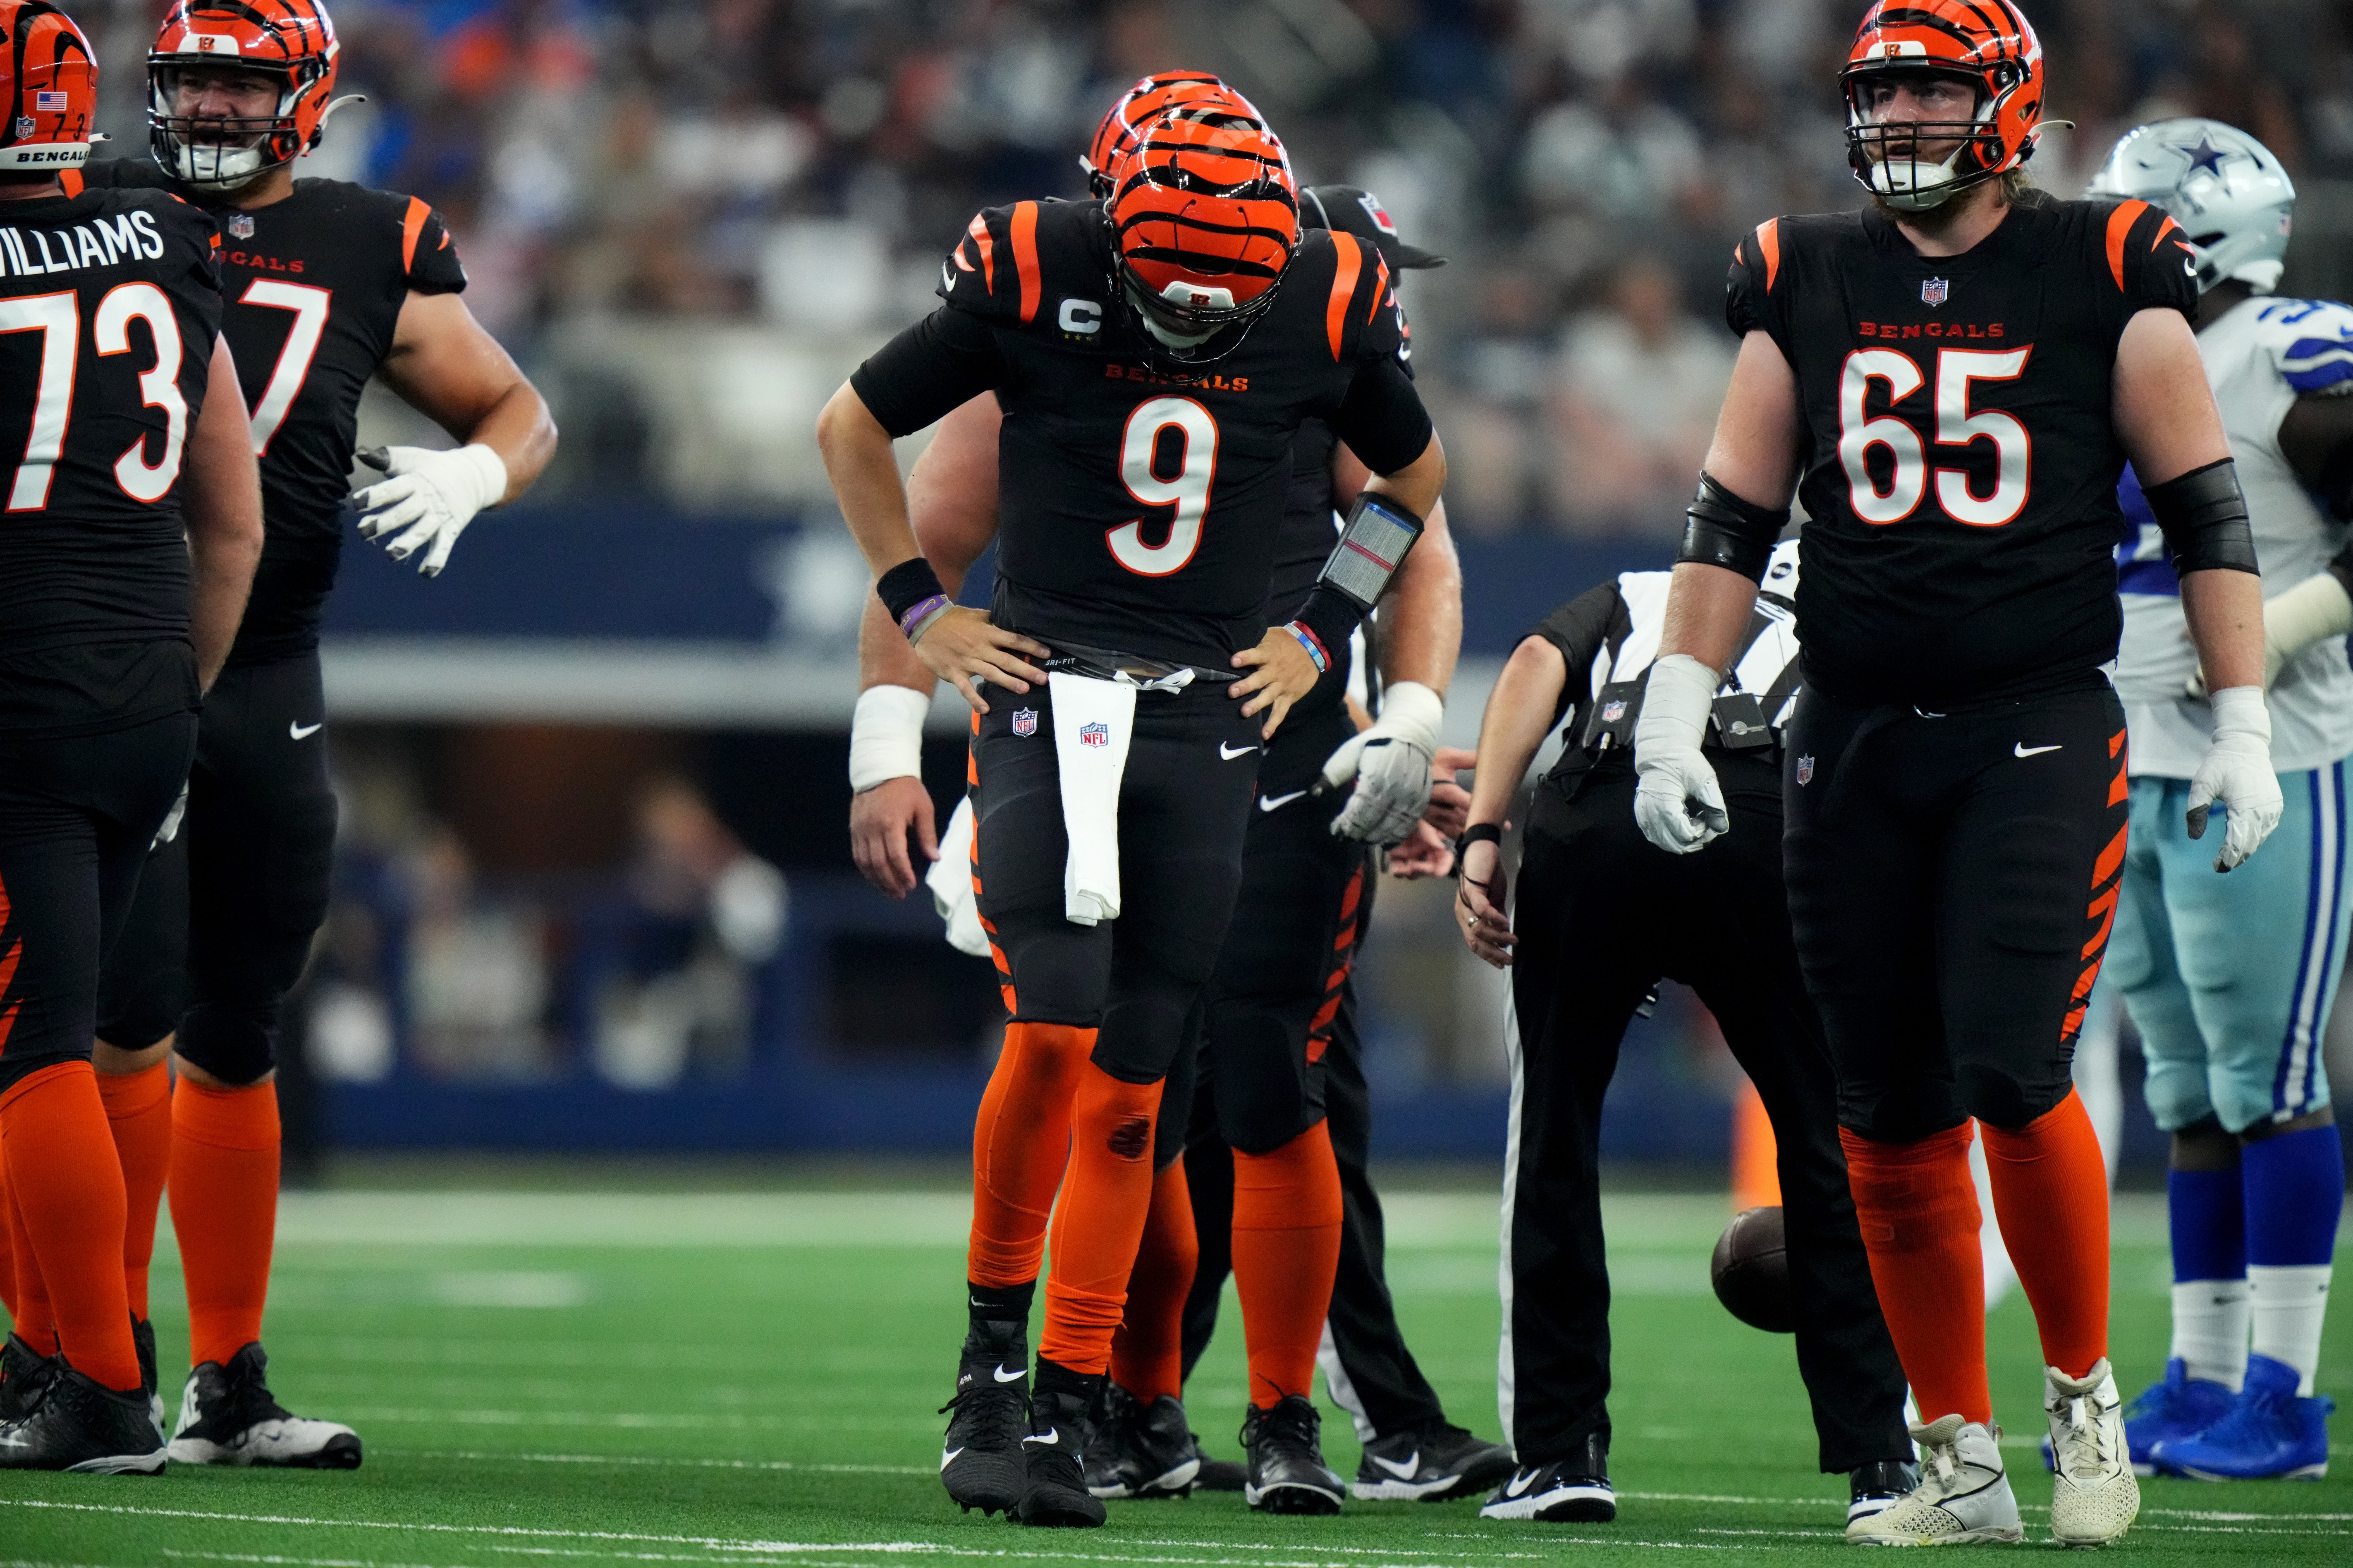 It's not yet time to panic about Bengals, but Sunday's game against Jets is a must-win | Opinion